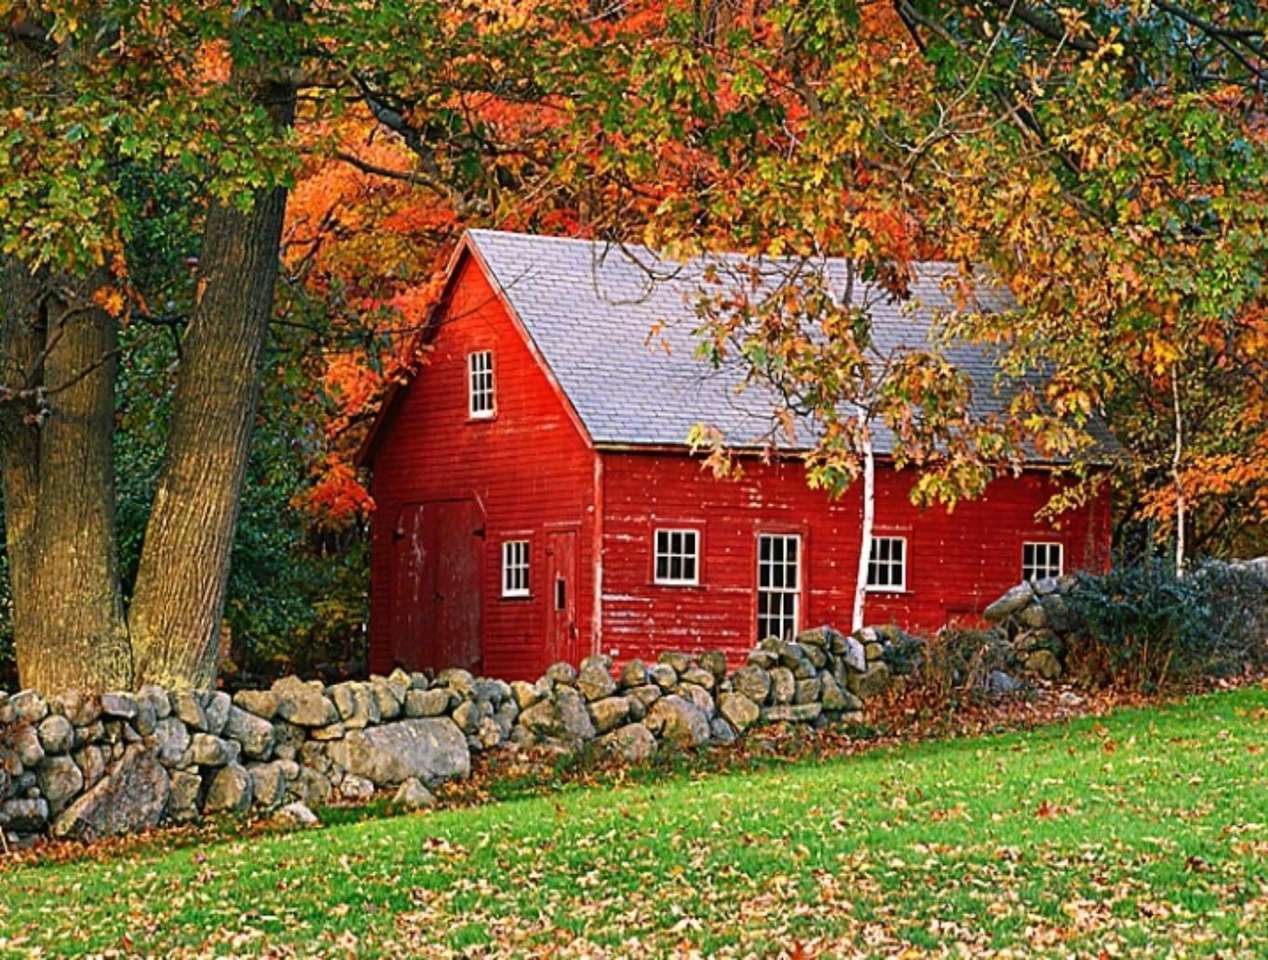 Autumn in the USA countryside jigsaw puzzle online